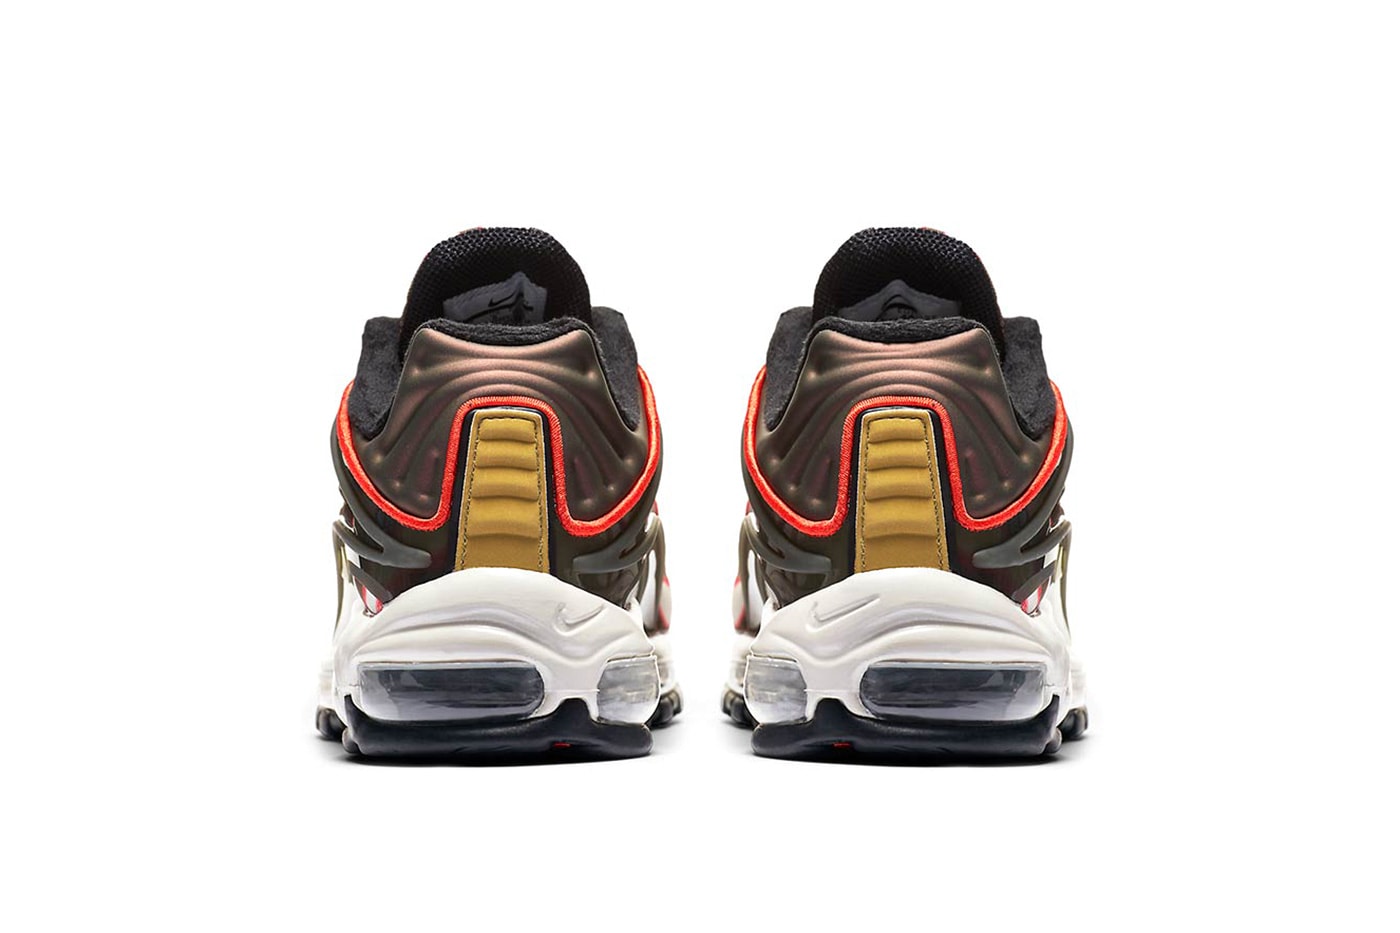 Nike Air Max Deluxe sequoia official images 2018 footwear nike sportswear